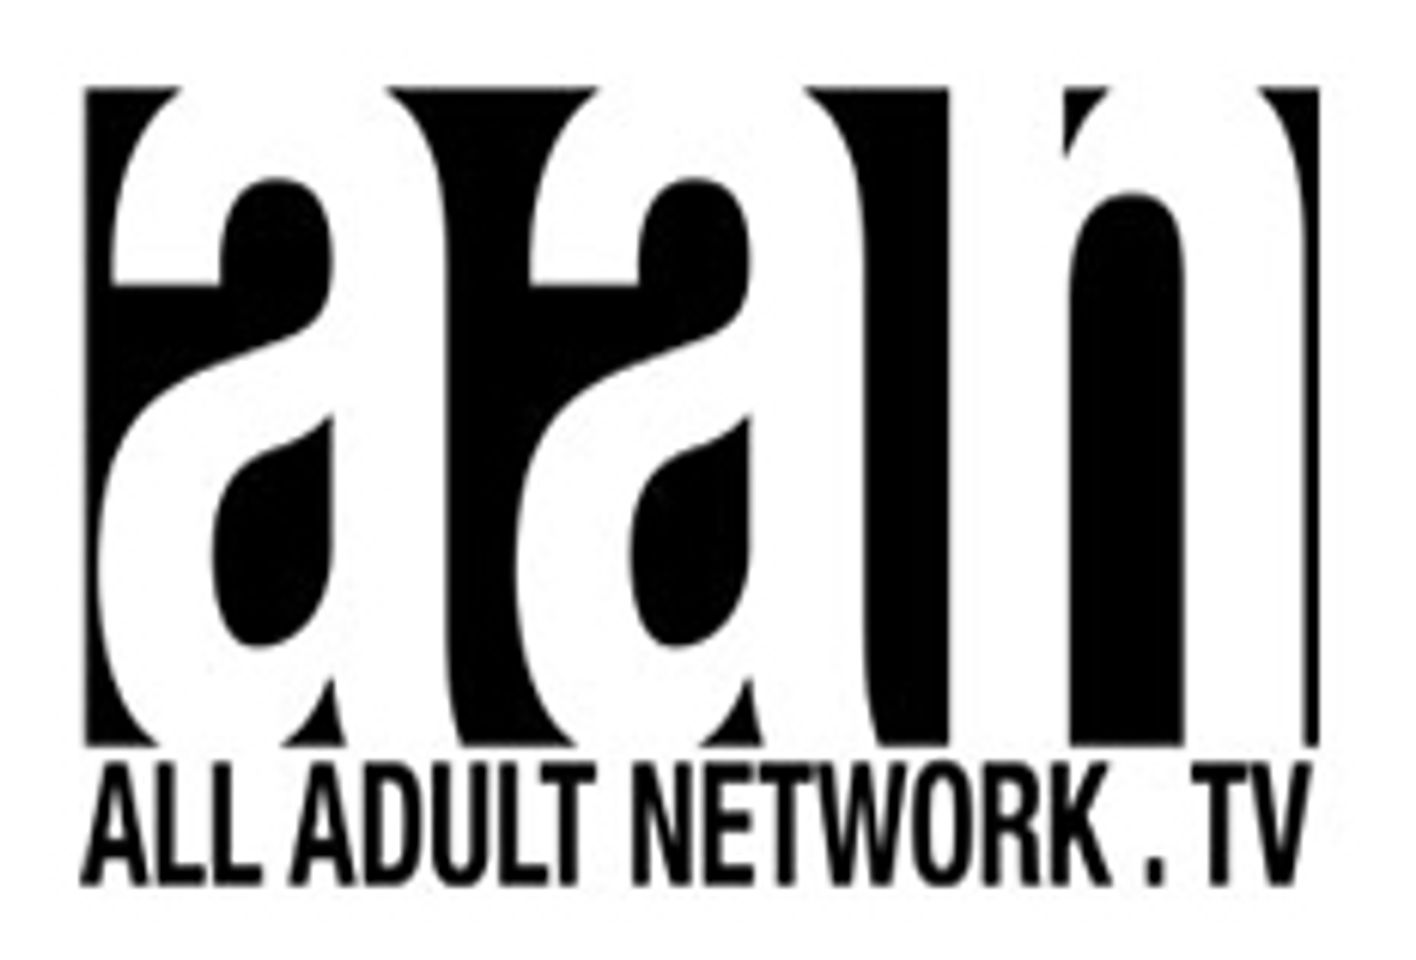 The All Adult Network Returns to Vegas for AEE